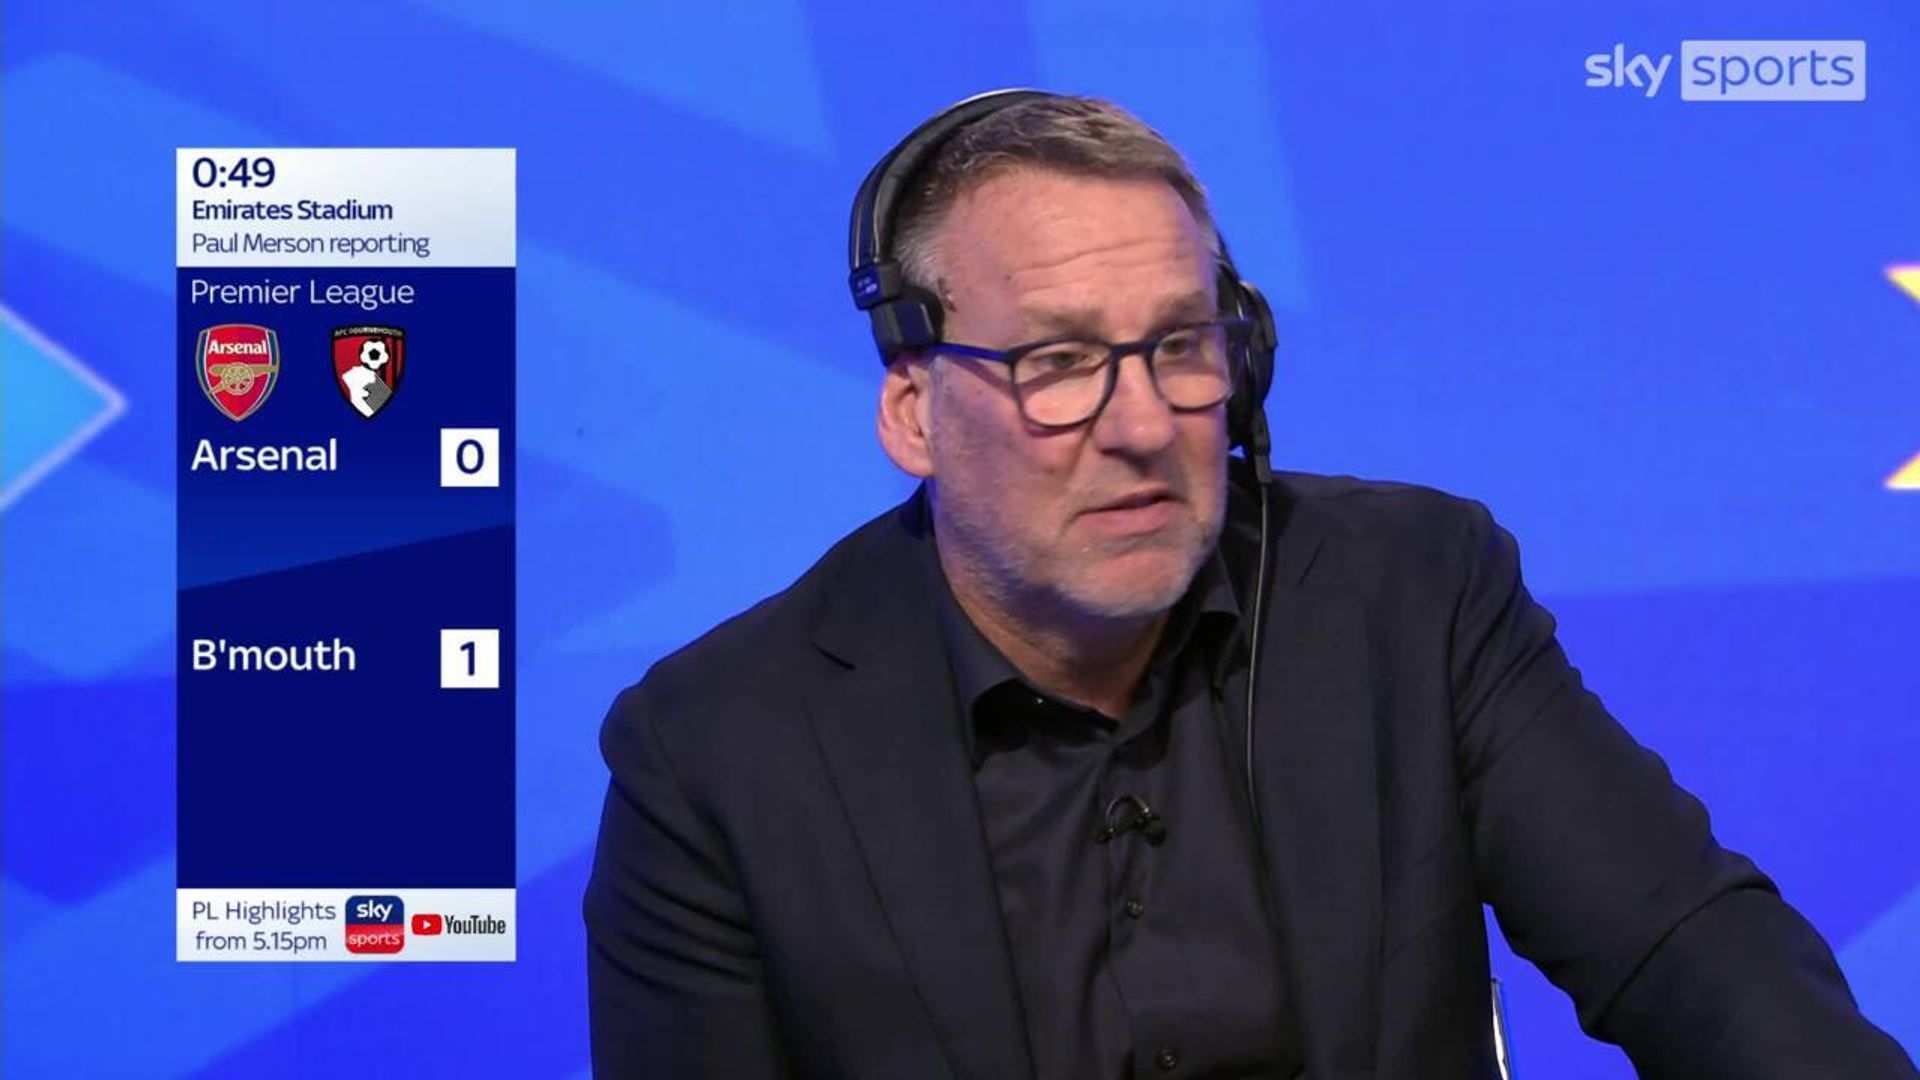 'Arteta is stone-faced!' - Merson reacts to Billing's speedy PL goal!